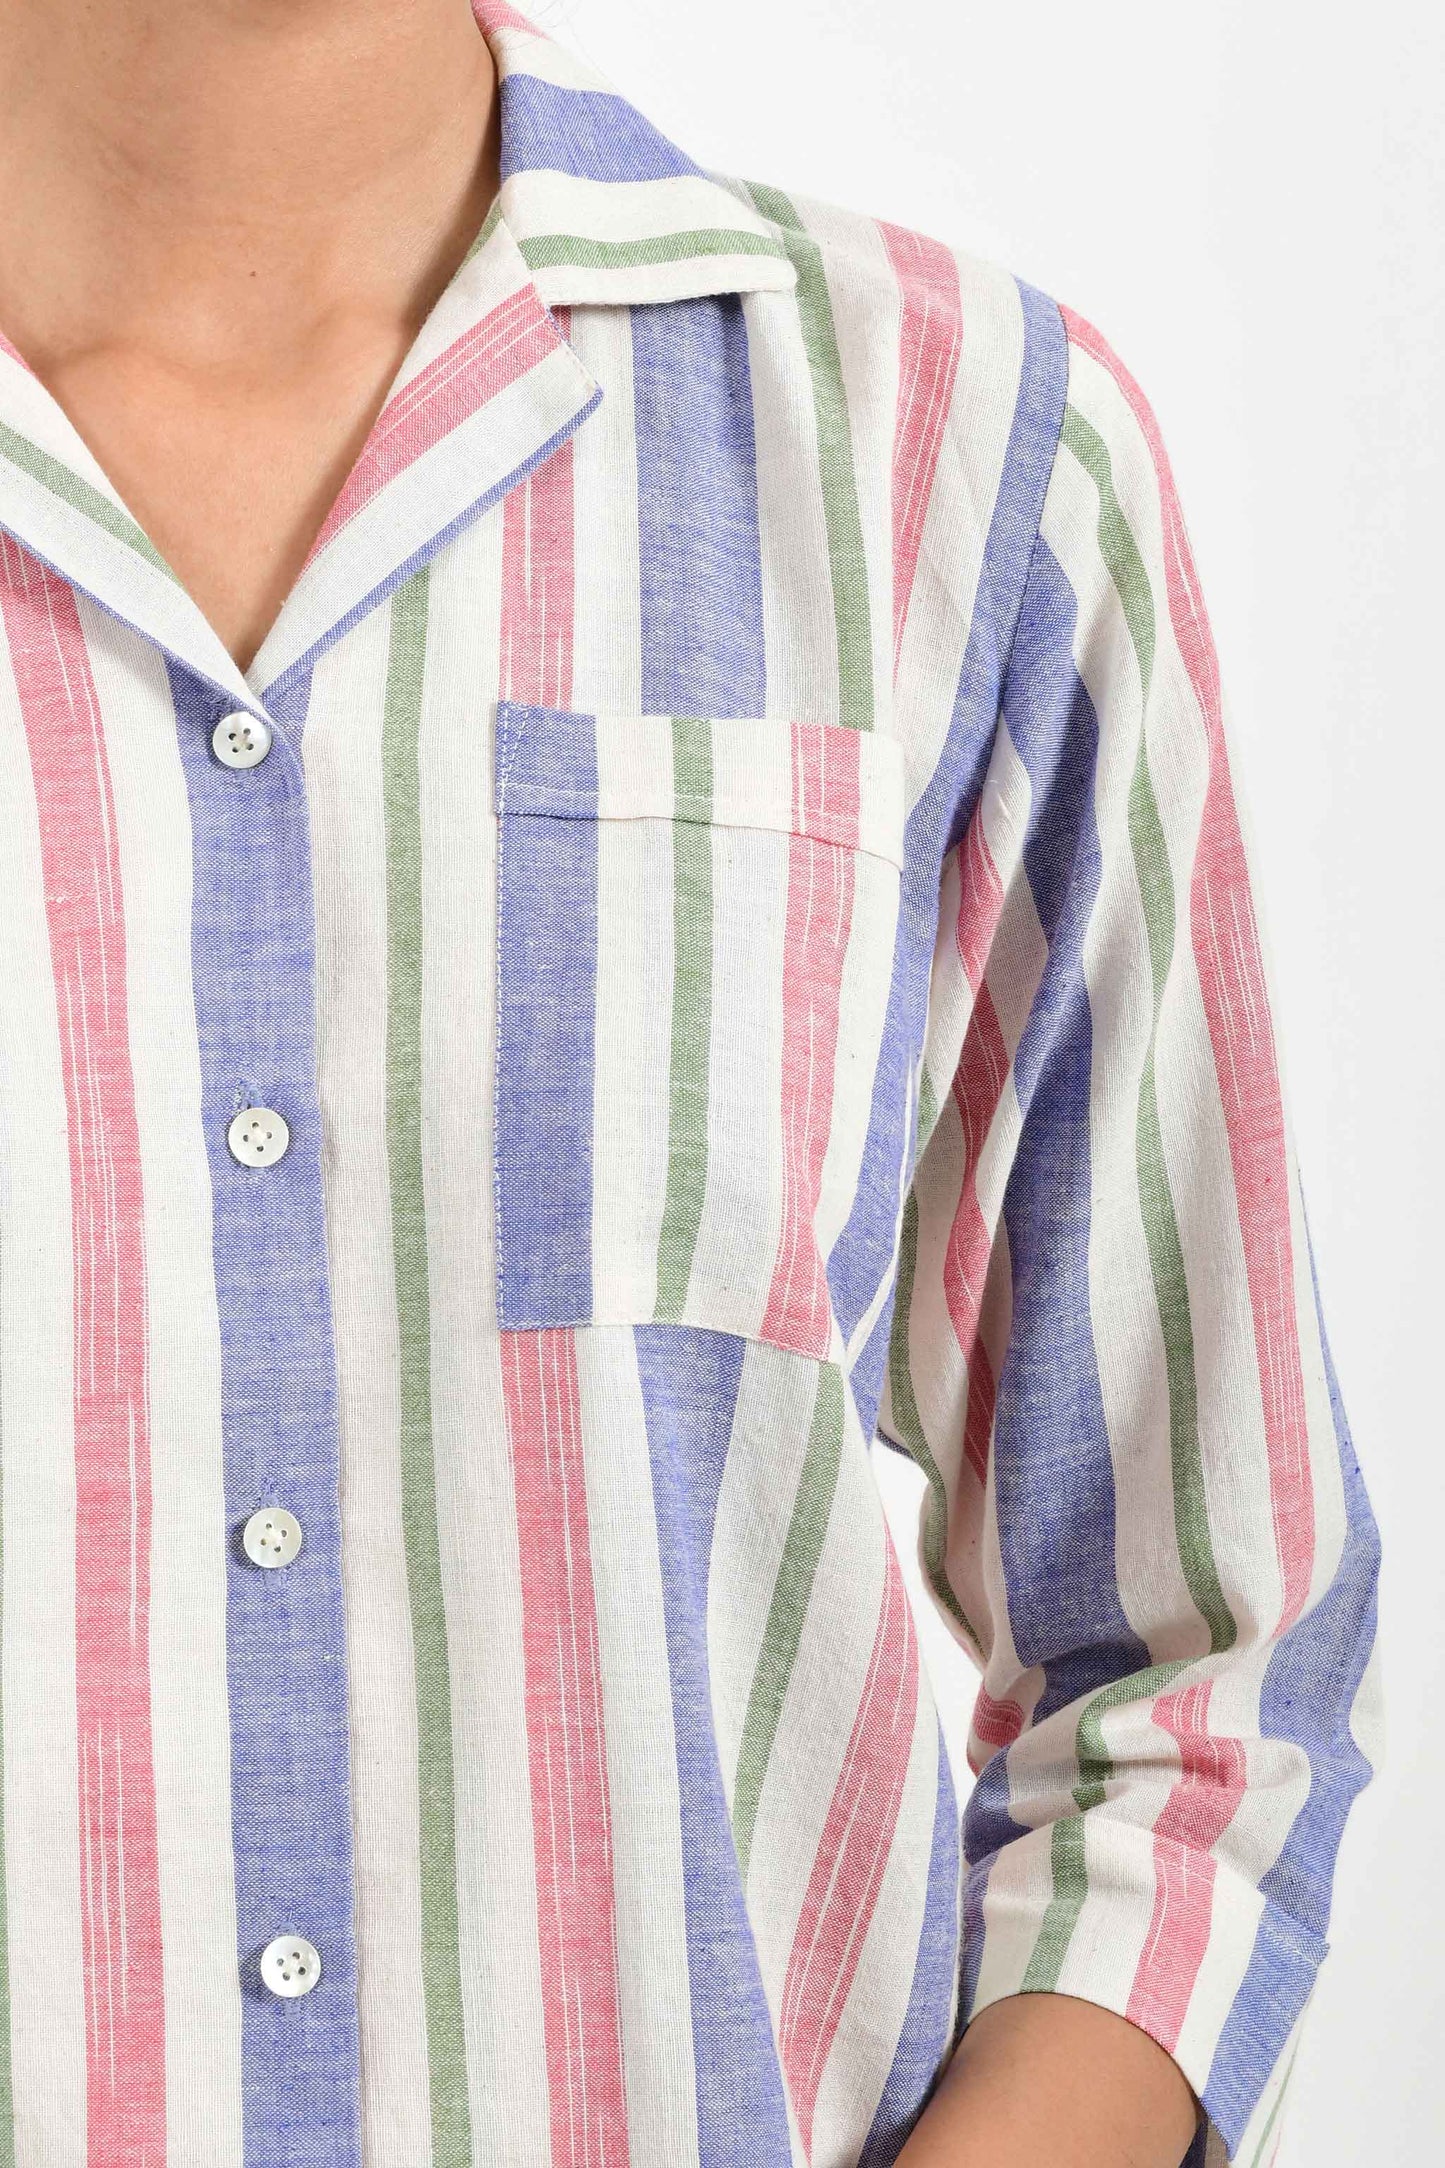 Close-up of an Indian female womenswear fashion model in a candy colored striped azo-free dyed handspun and handwoven khadi cotton nightwear pyjama & shirt by Cotton Rack.